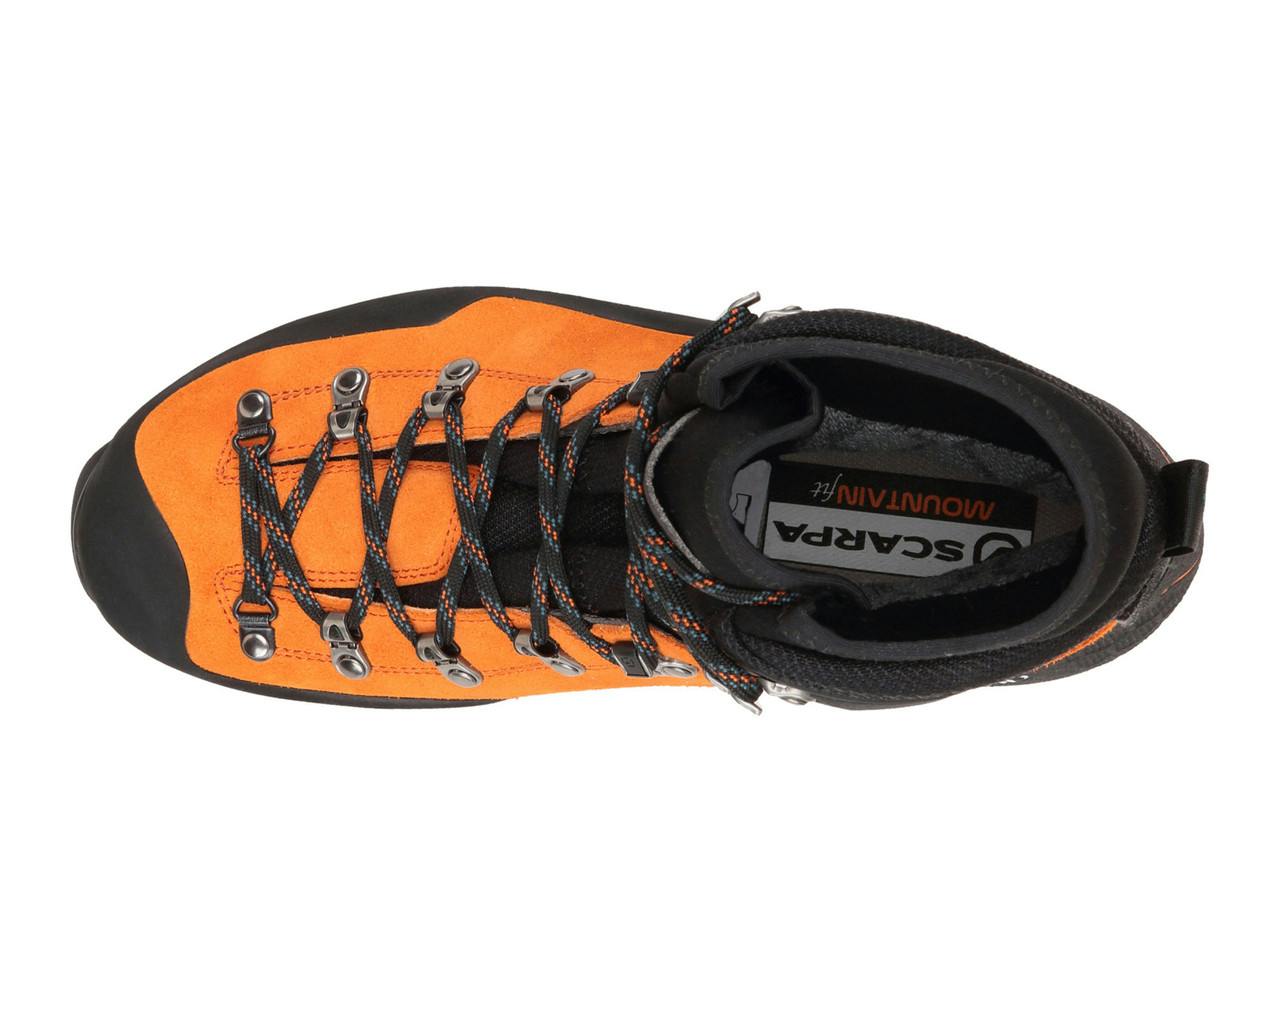 Mont Blanc Pro Mountaineering Boots Tonic